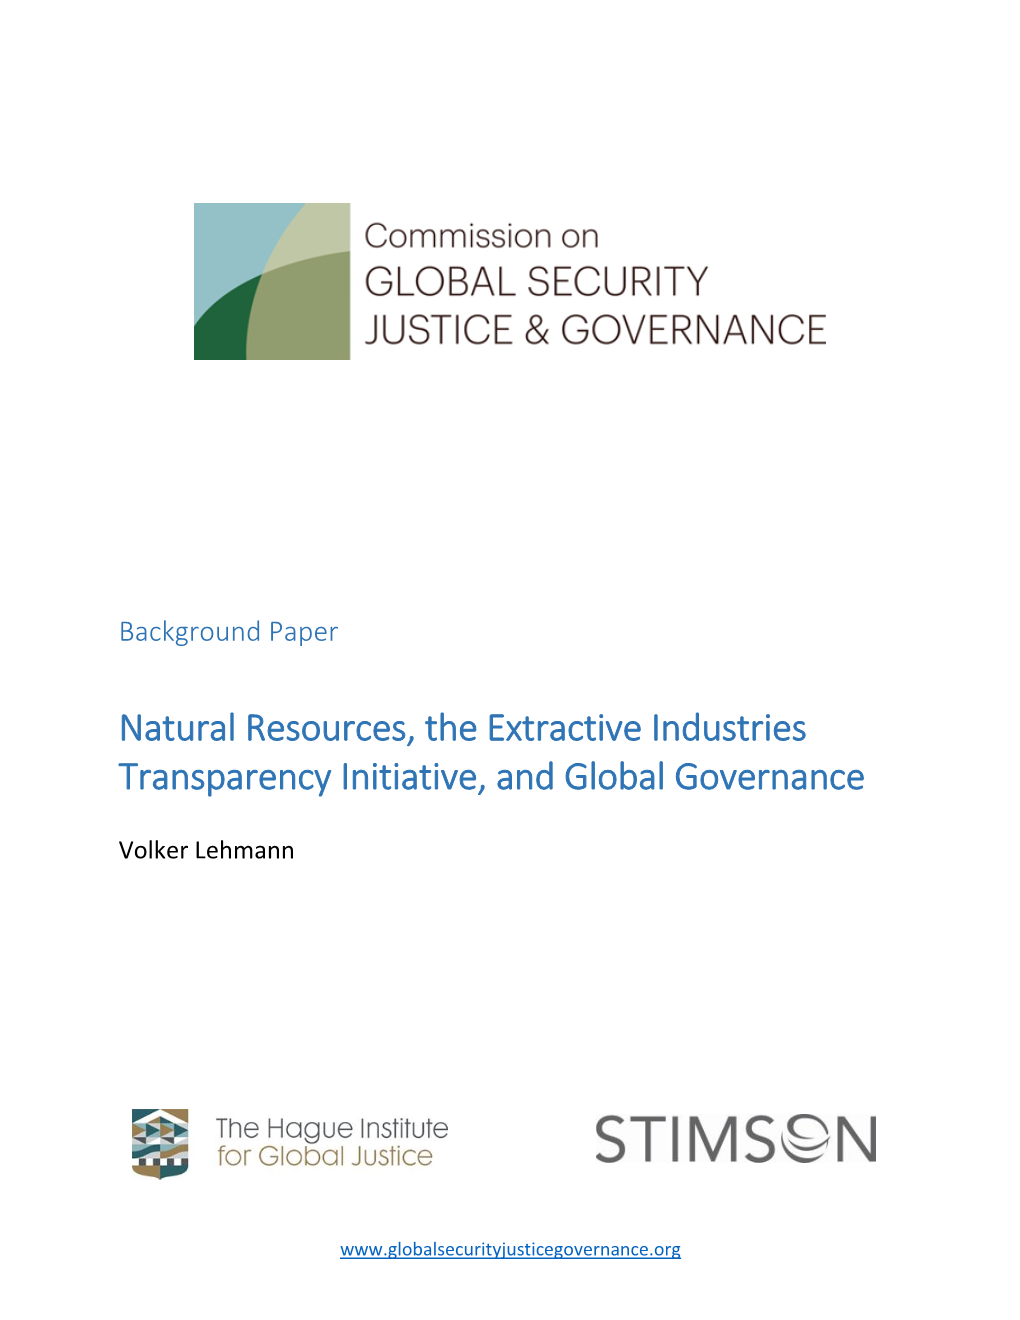 Natural Resources, the Extractive Industries Transparency Initiative, and Global Governance